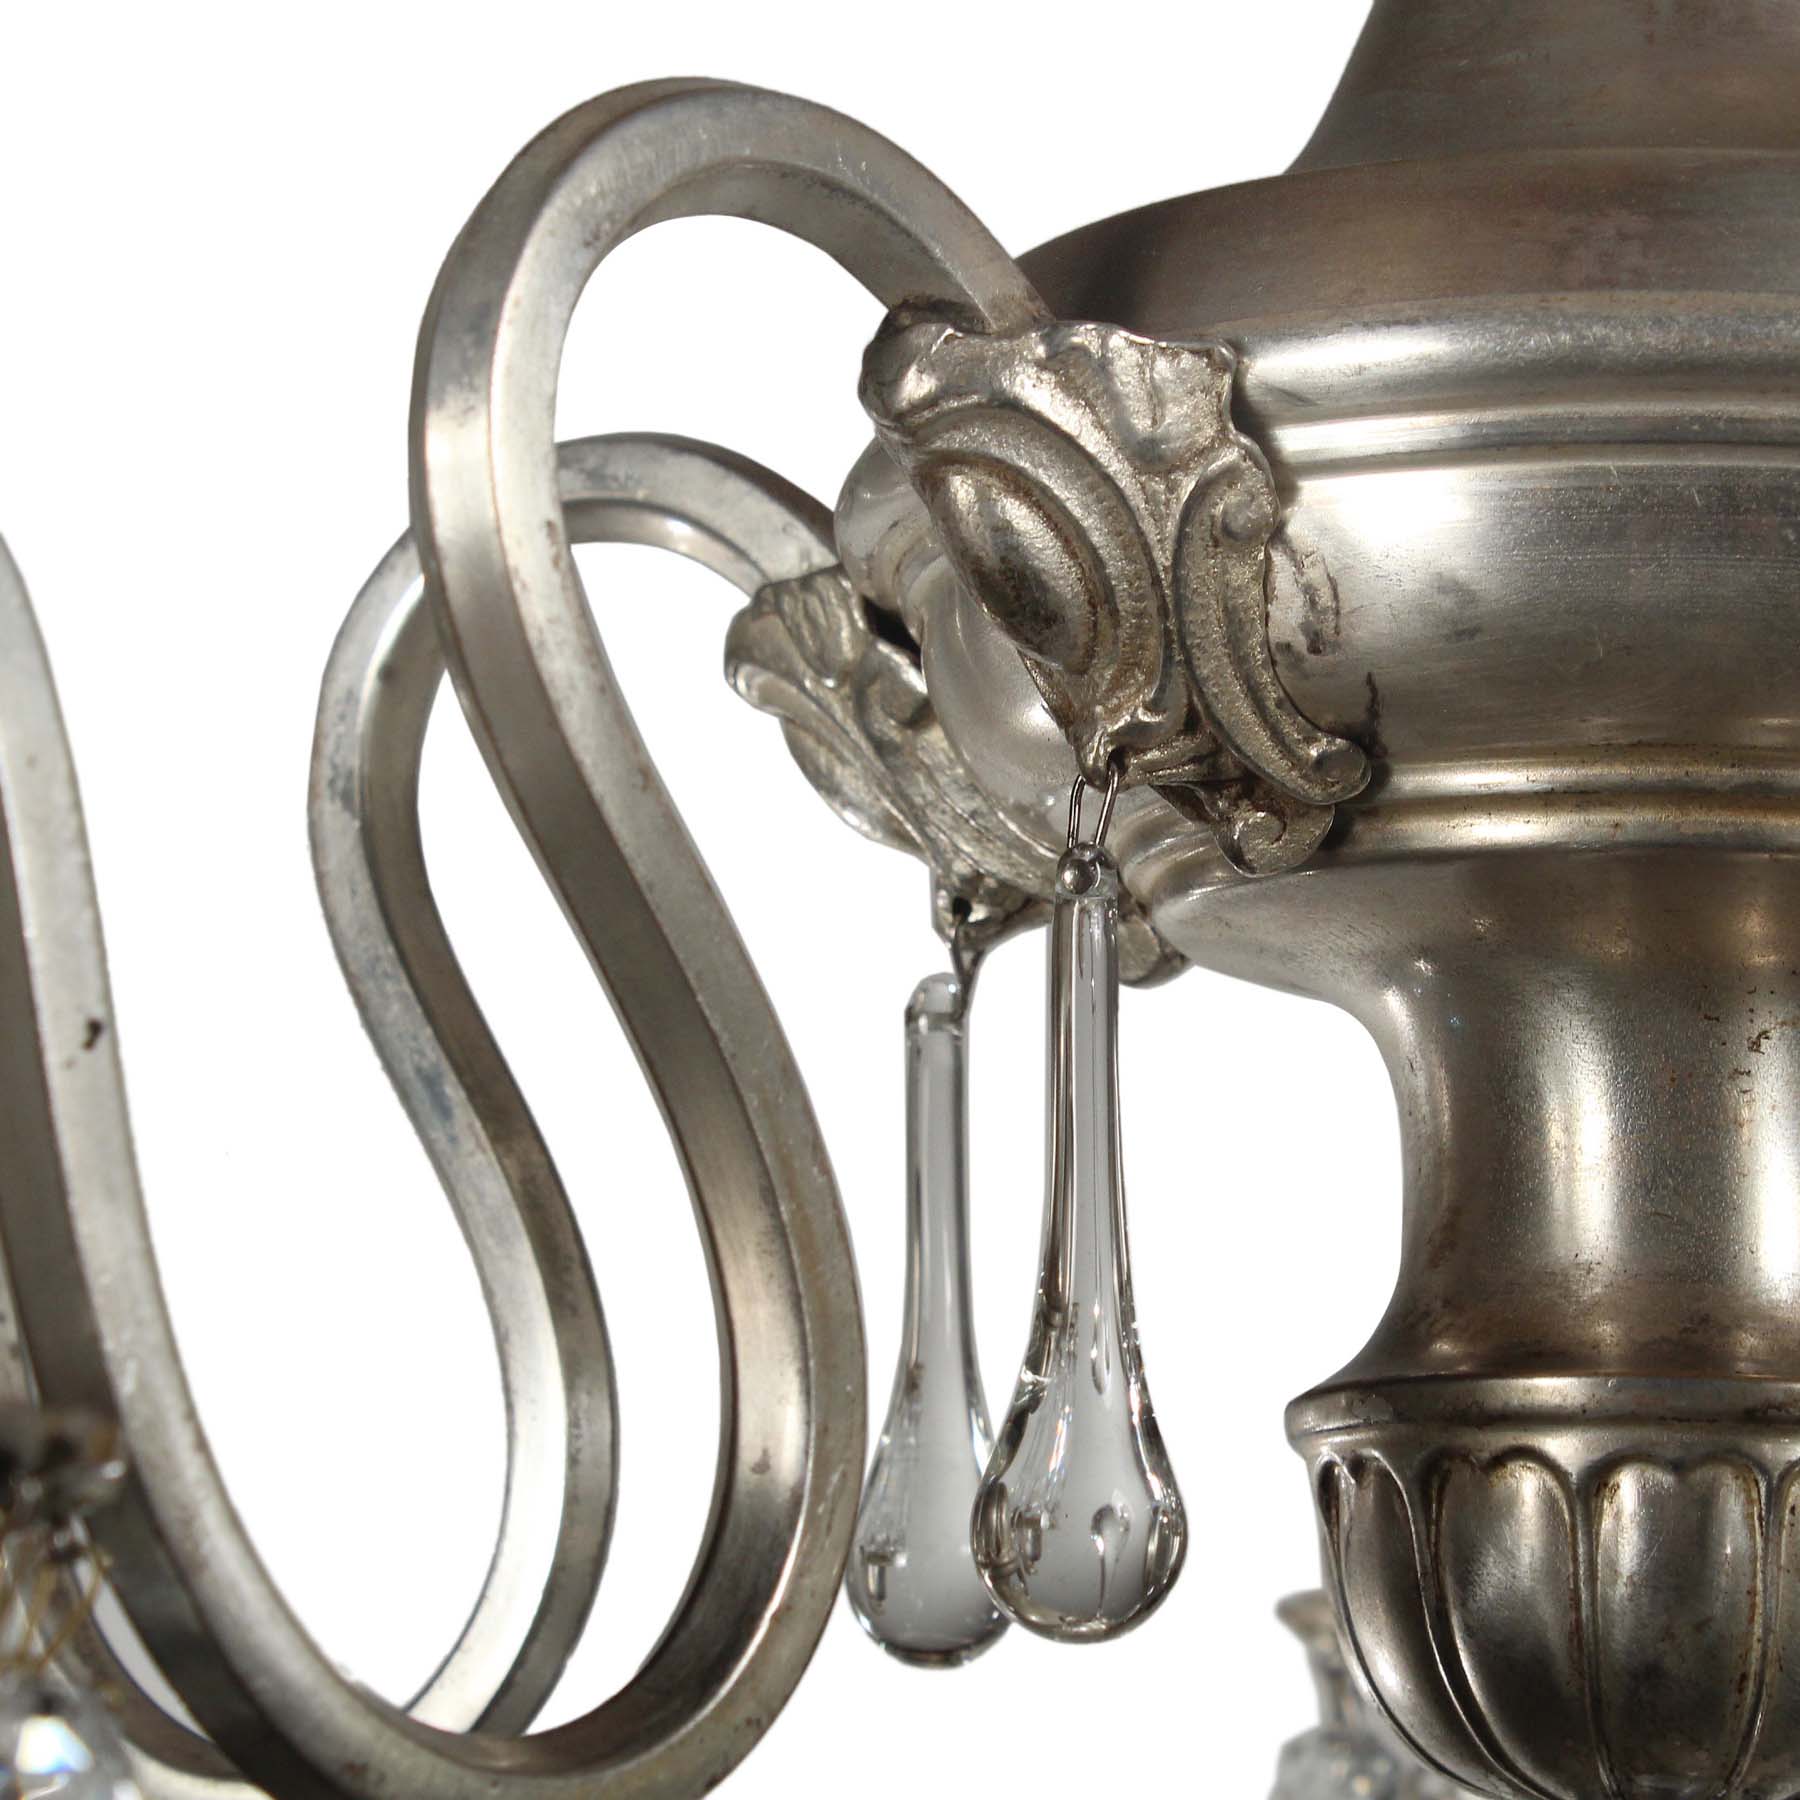 SOLD Antique Neoclassical Five-Light Semi-Flush Chandelier with Prisms, Silver Plate-67425